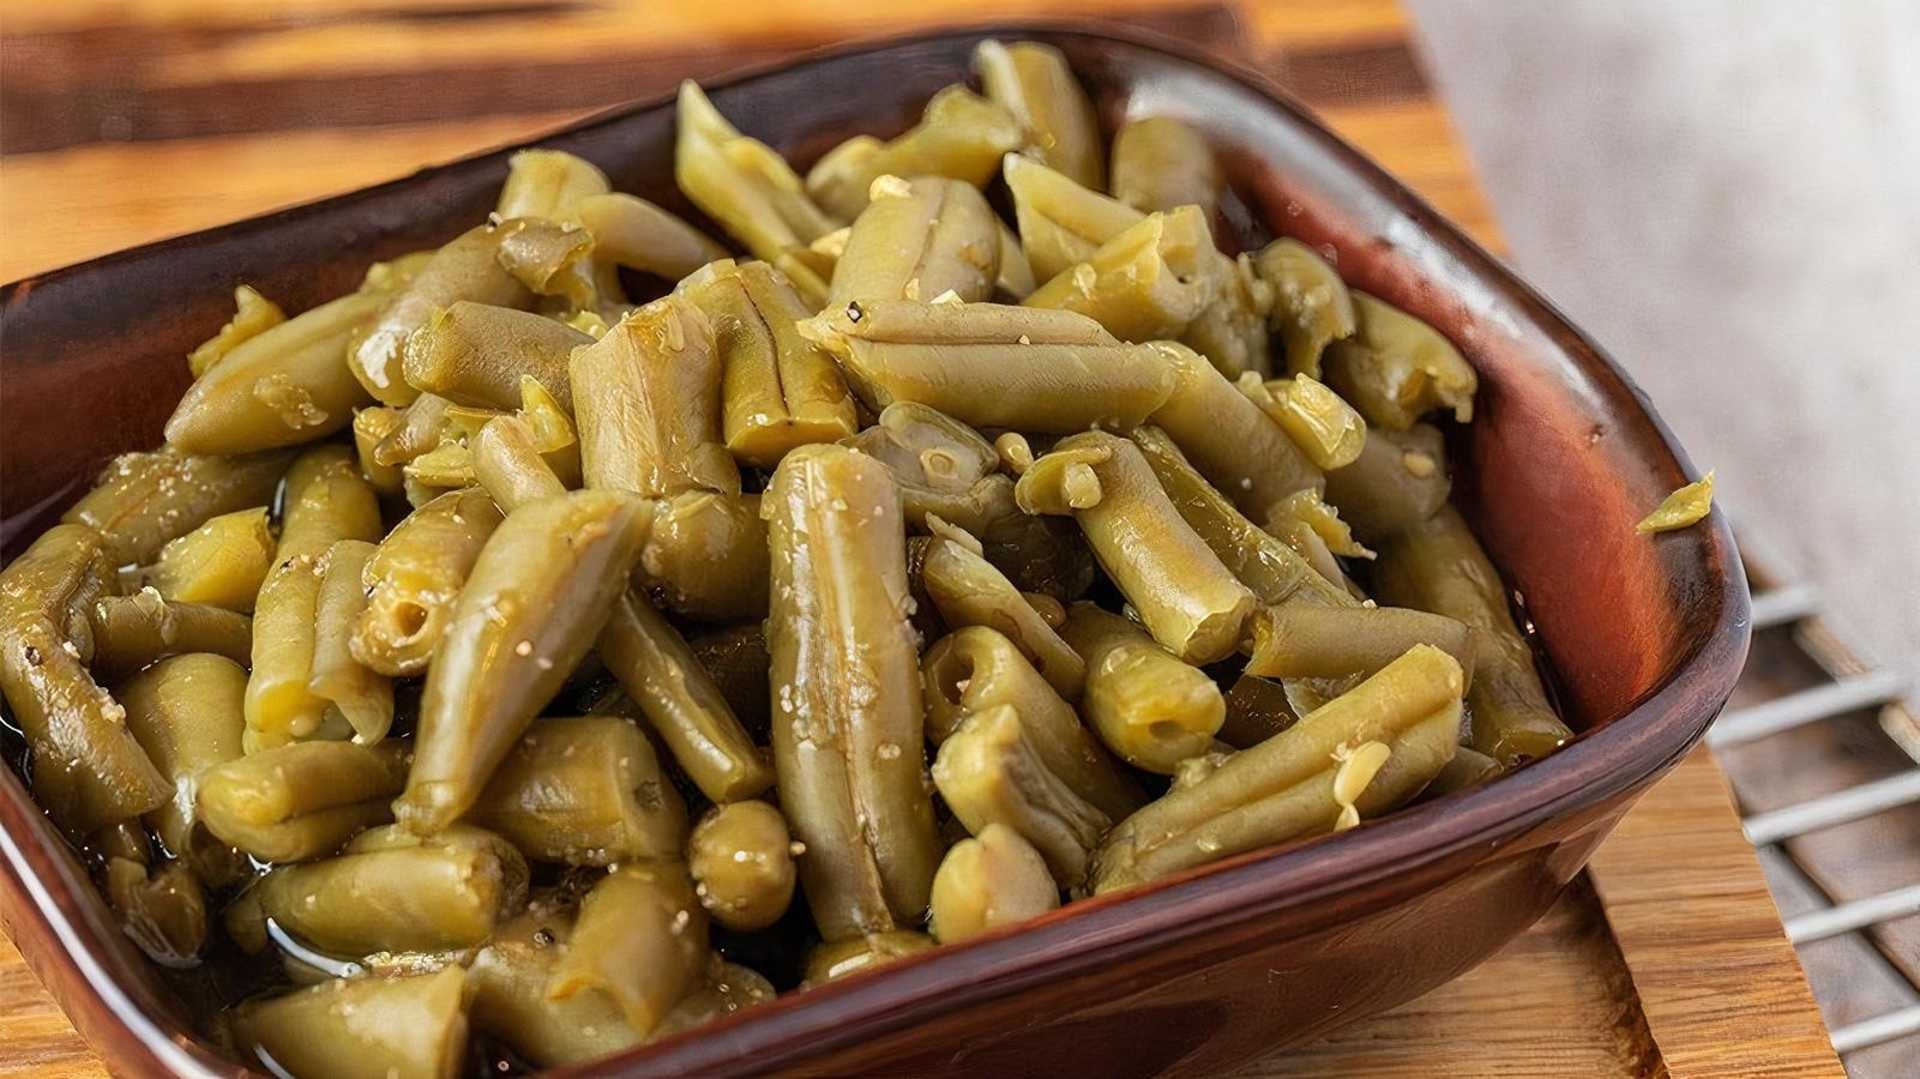 Canned Green Beans Taste Lavish With These Ingredient Additions